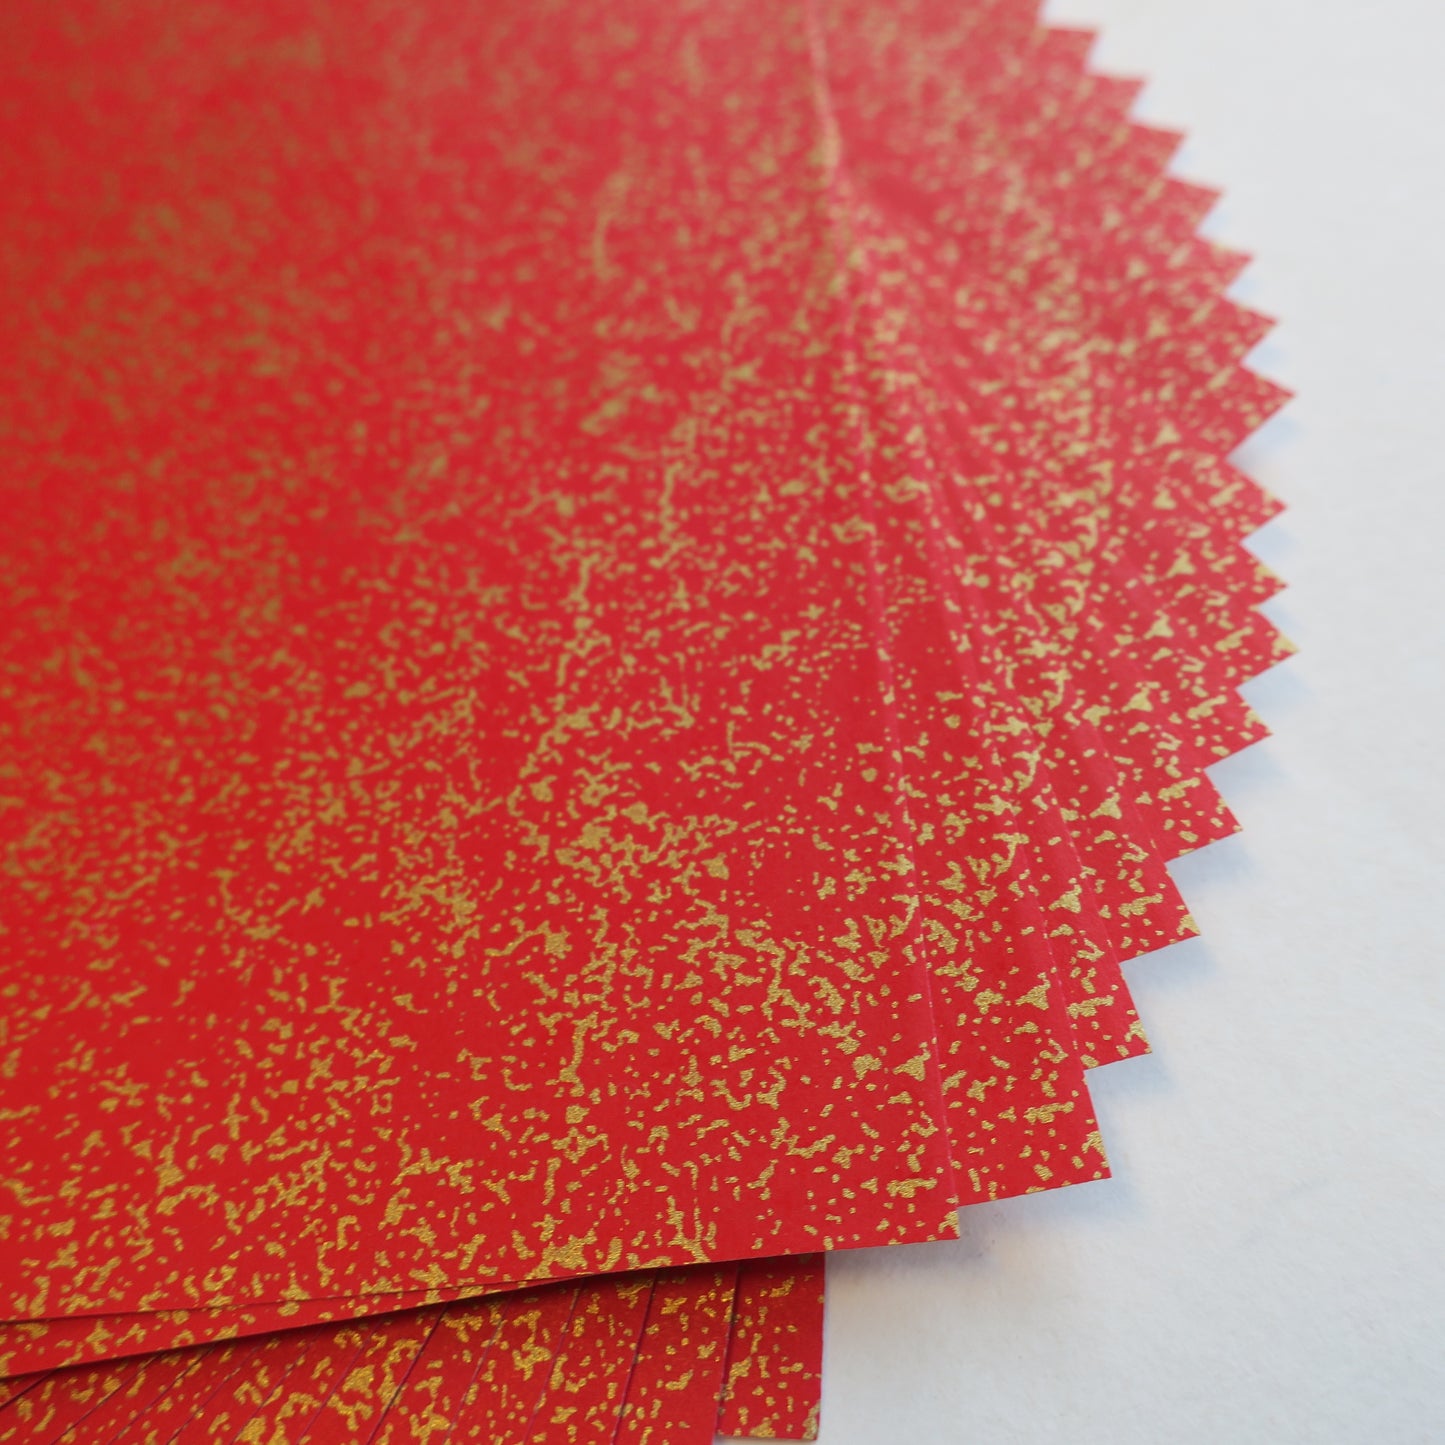 Pack of 20 Sheets 14x14cm Origami Paper - Red with gold flakes